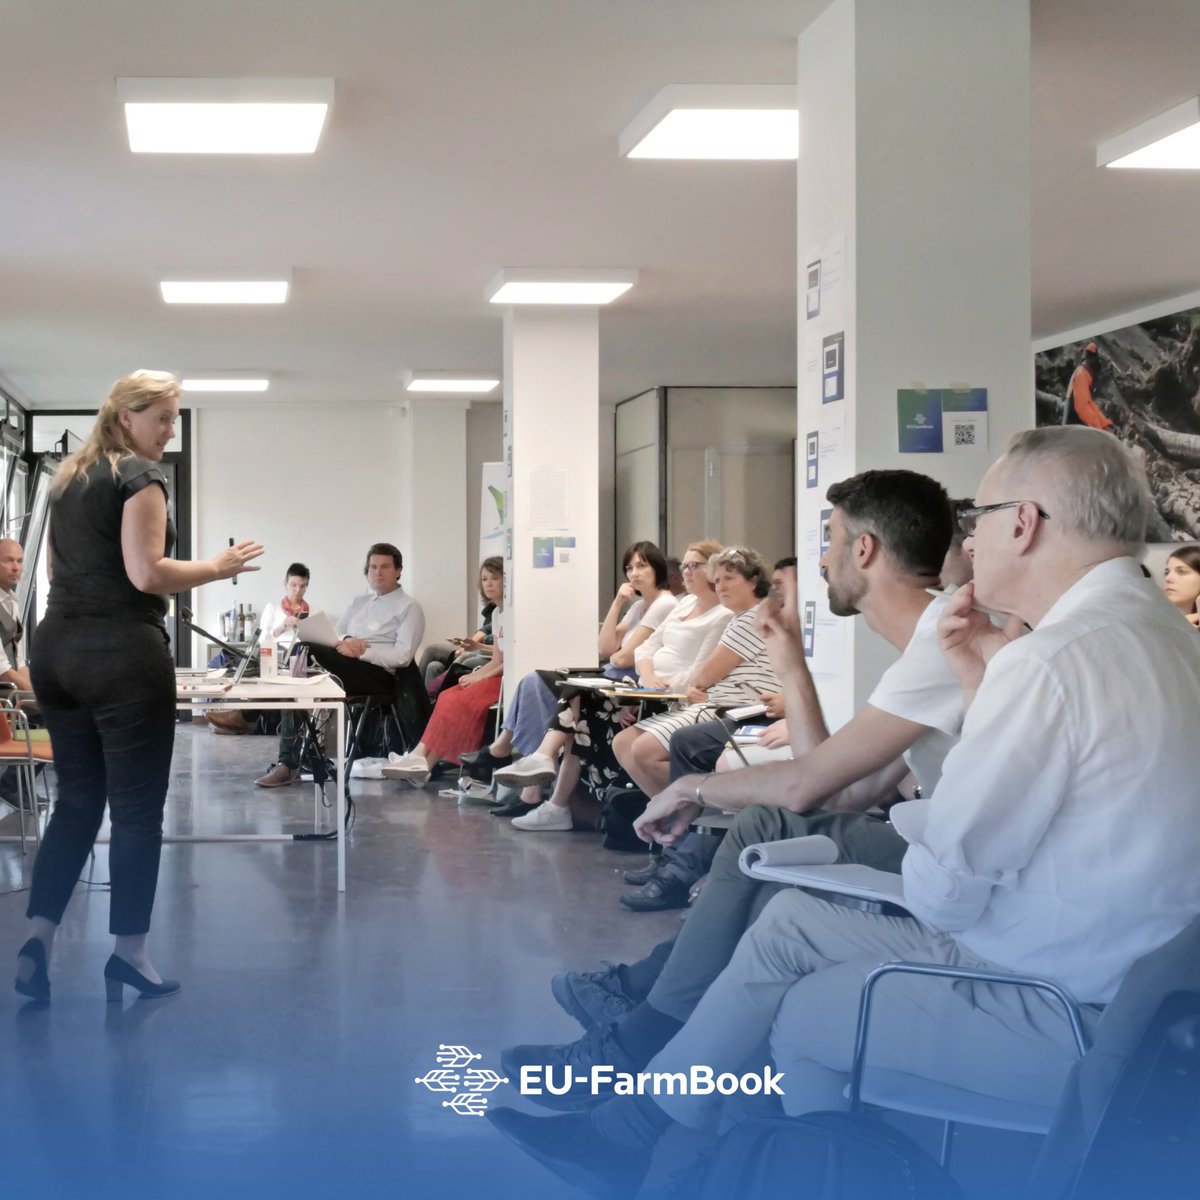 👏 We have reached the end of the first of three days of the #EUFarmBook Kick-Off Meeting, which is being held in Florence, Italy 👀 It was a day to meet new partners, get to know some expectations, and identify lessons learned from the previous EURAKNOS and EUREKA projects